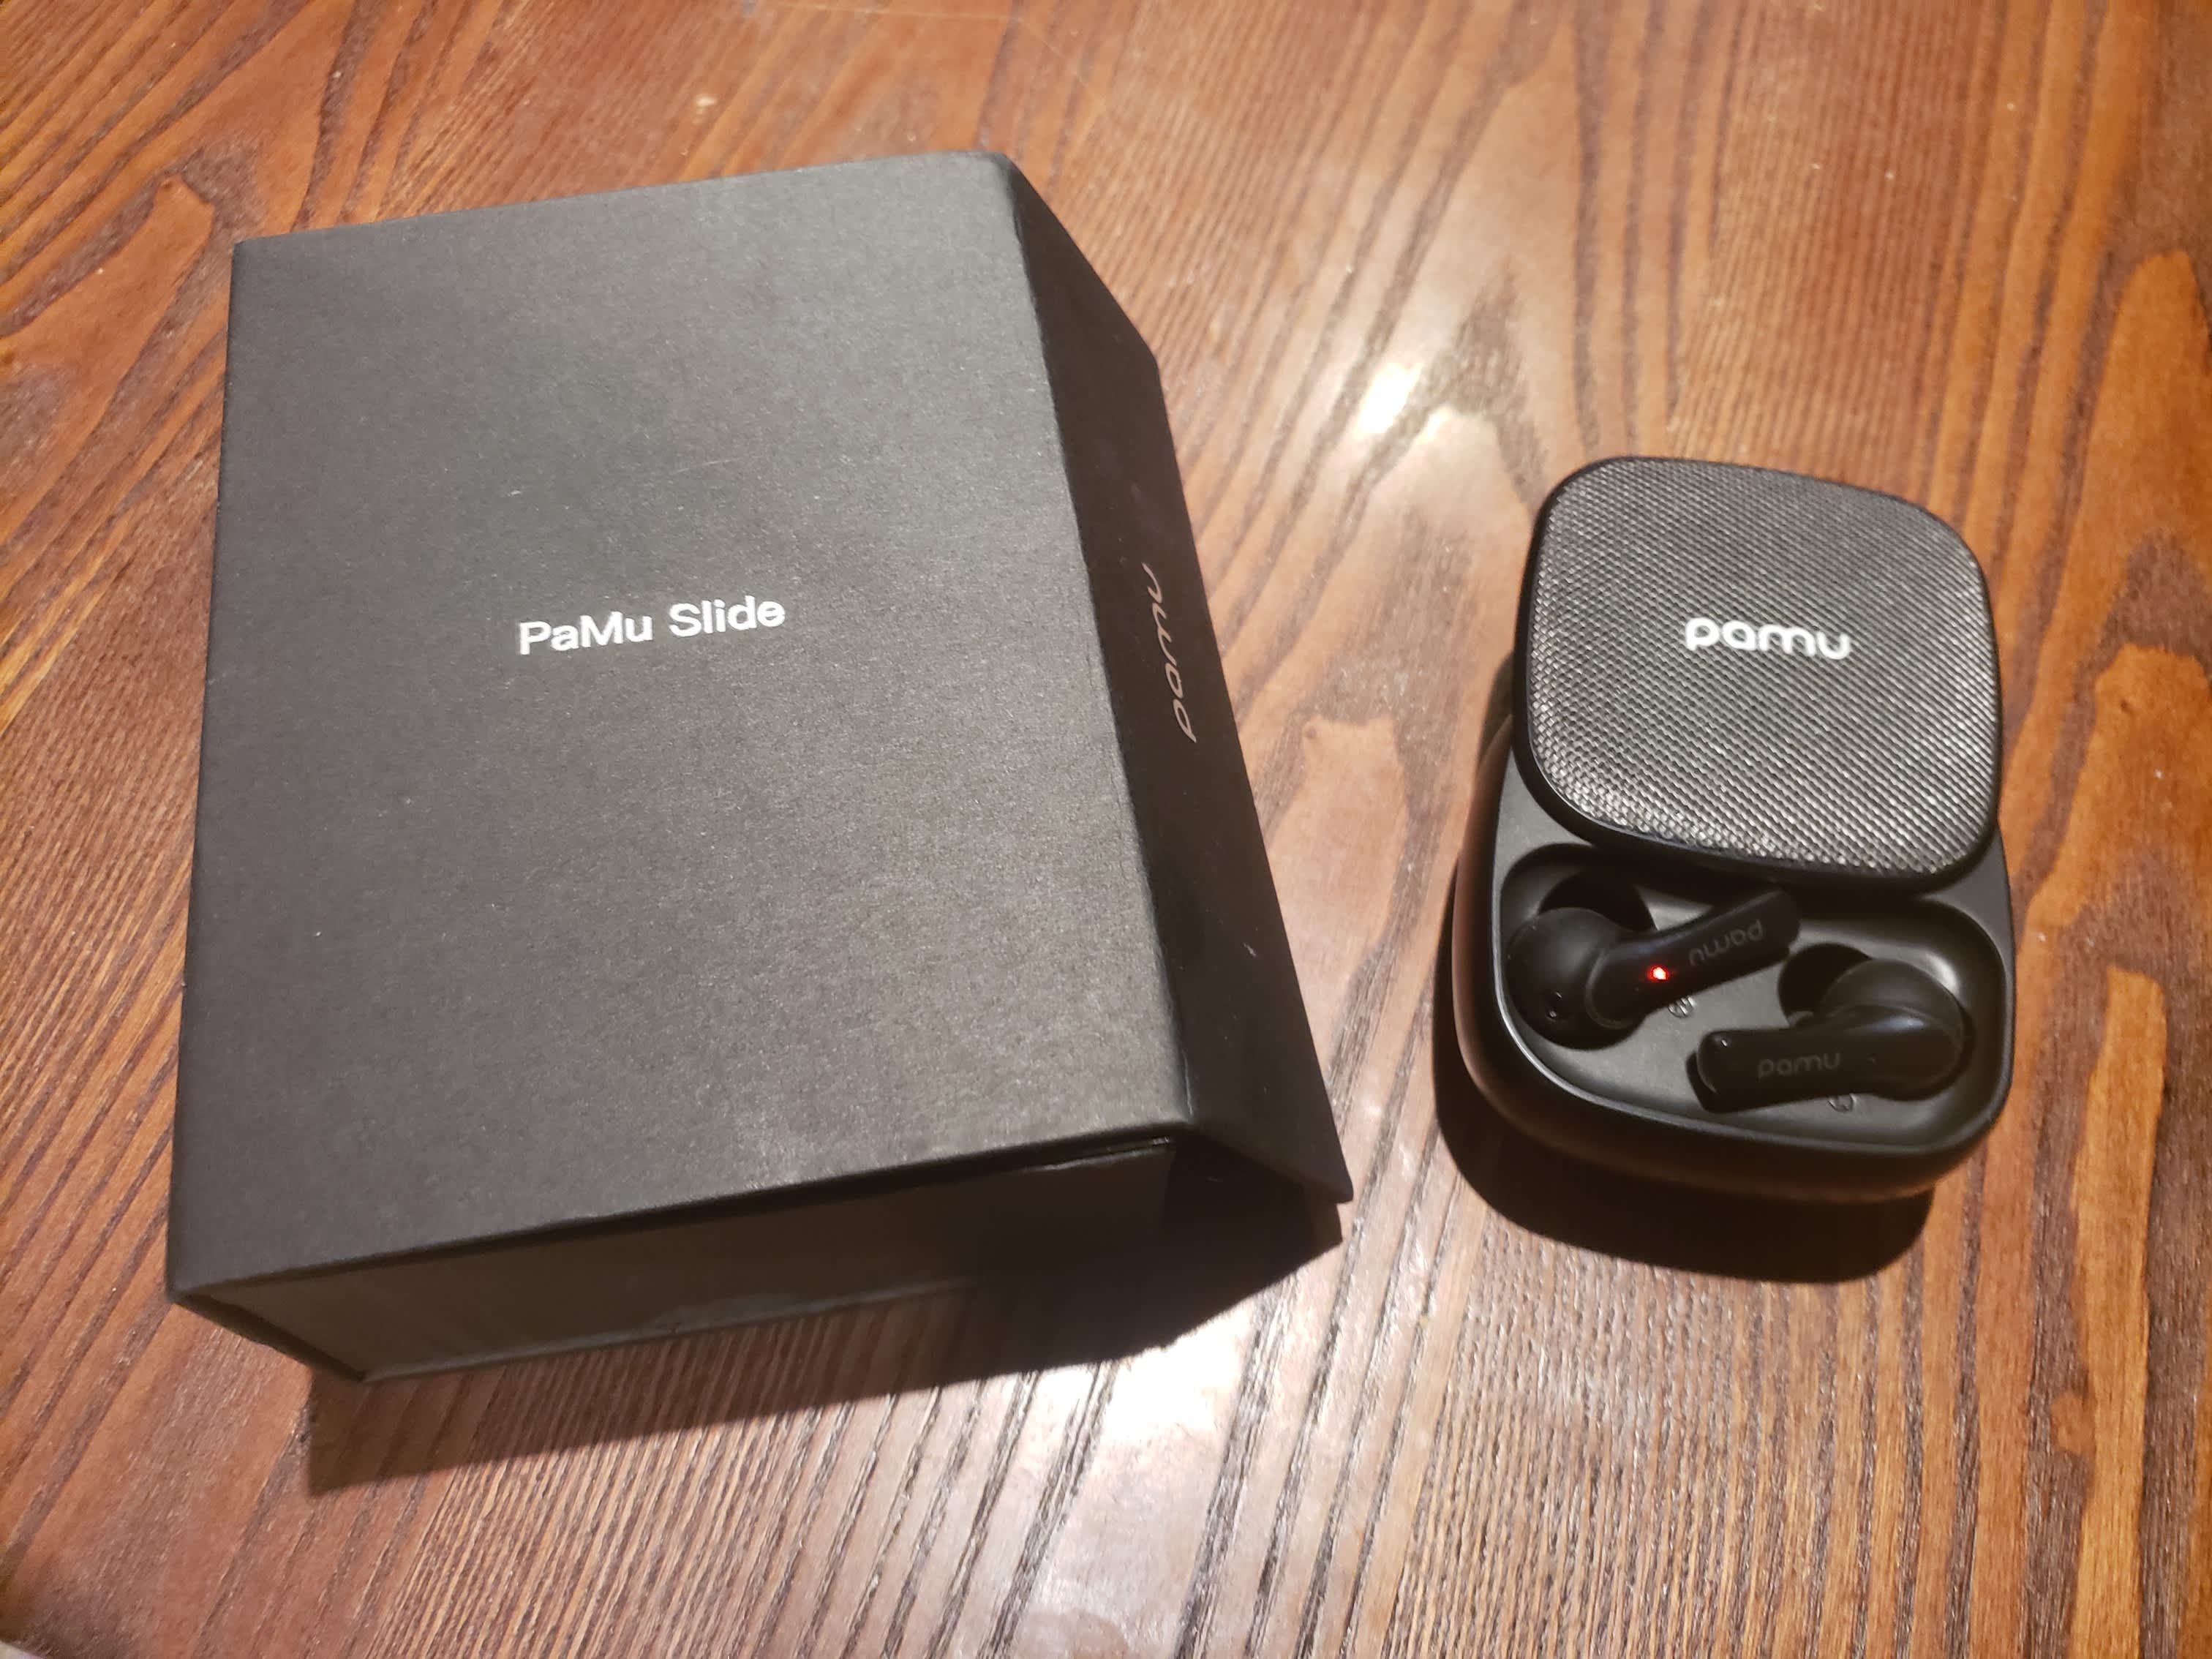 Comparing $69 Pamu Slide wireless earbuds to Apple AirPods3024 x 2268